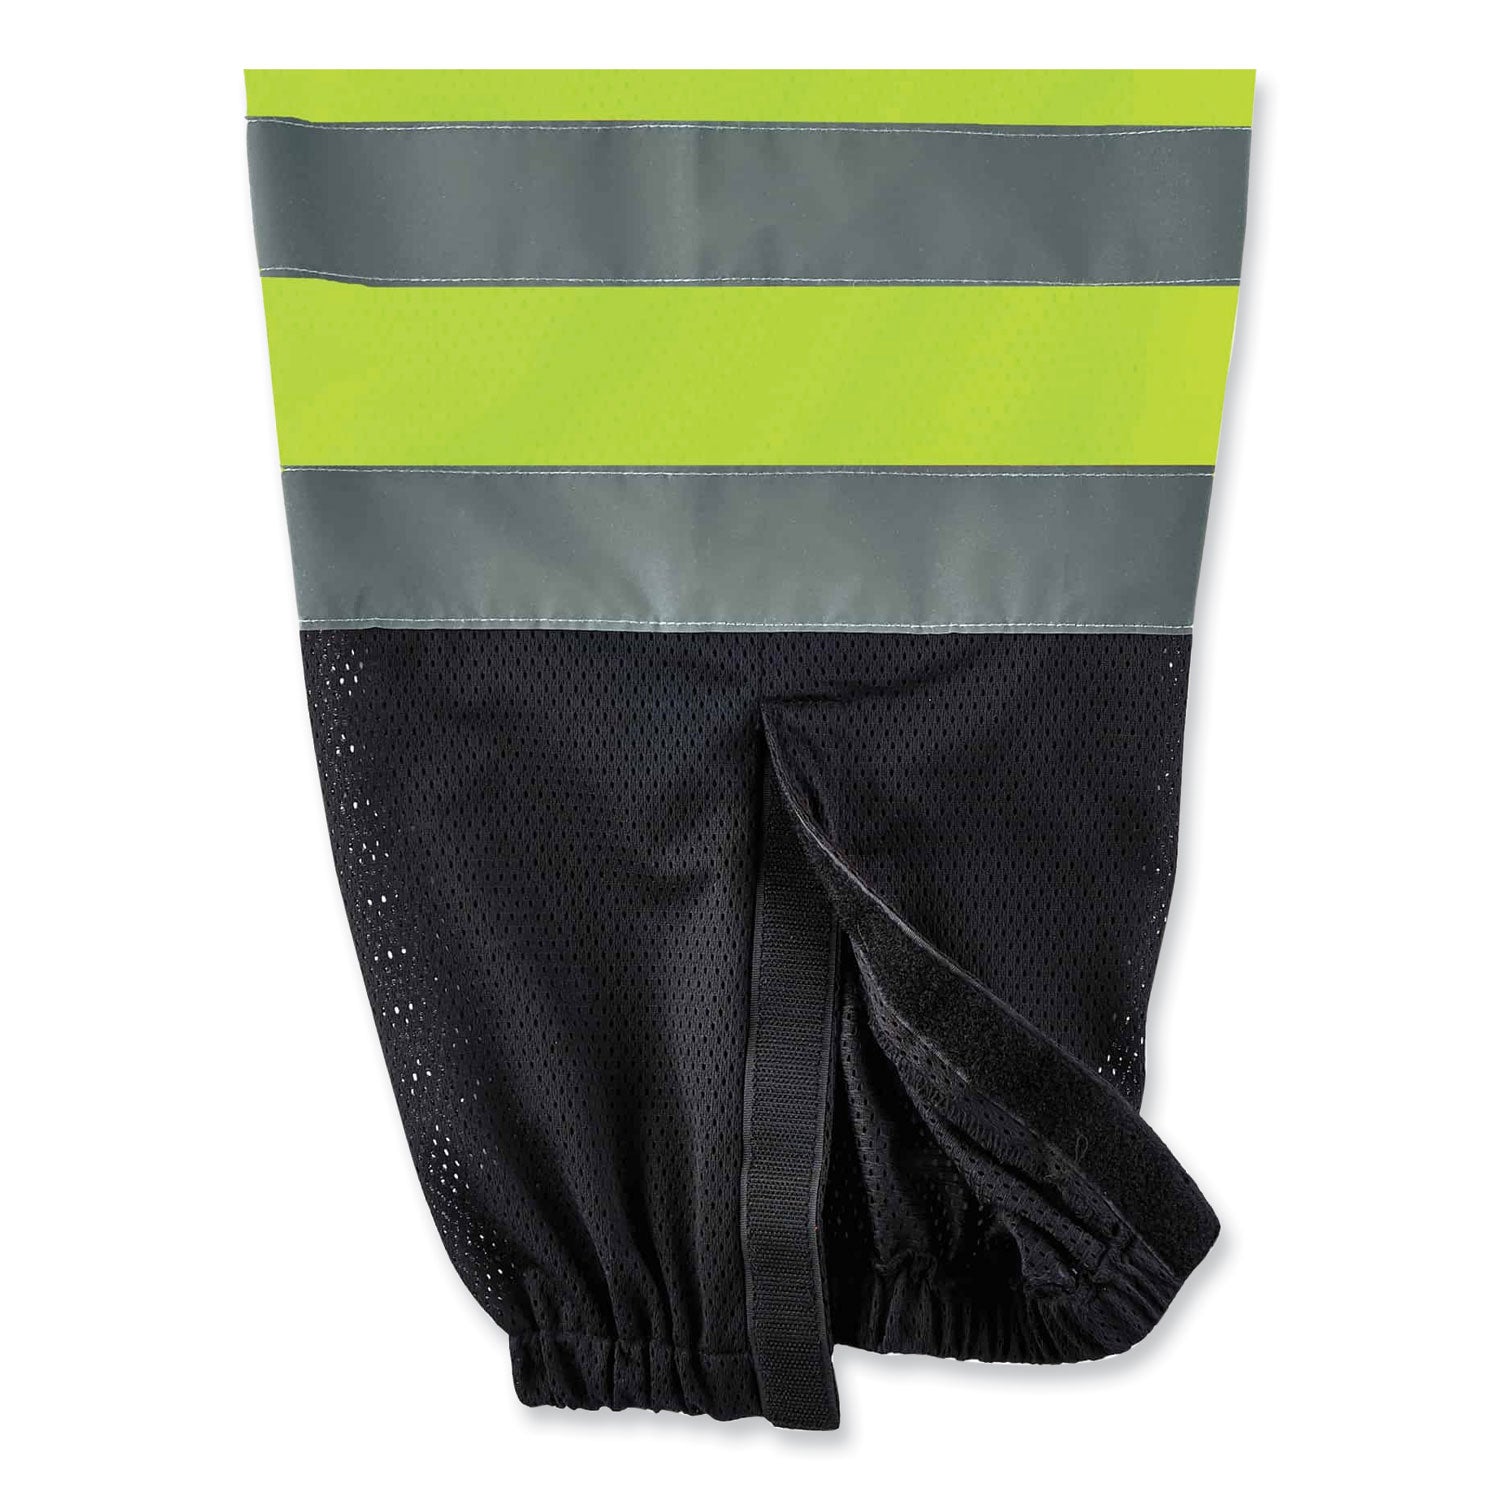 glowear-8910bk-class-e-hi-vis-pants-with-black-bottom-polyester-large-x-large-lime-ships-in-1-3-business-days_ego23955 - 3